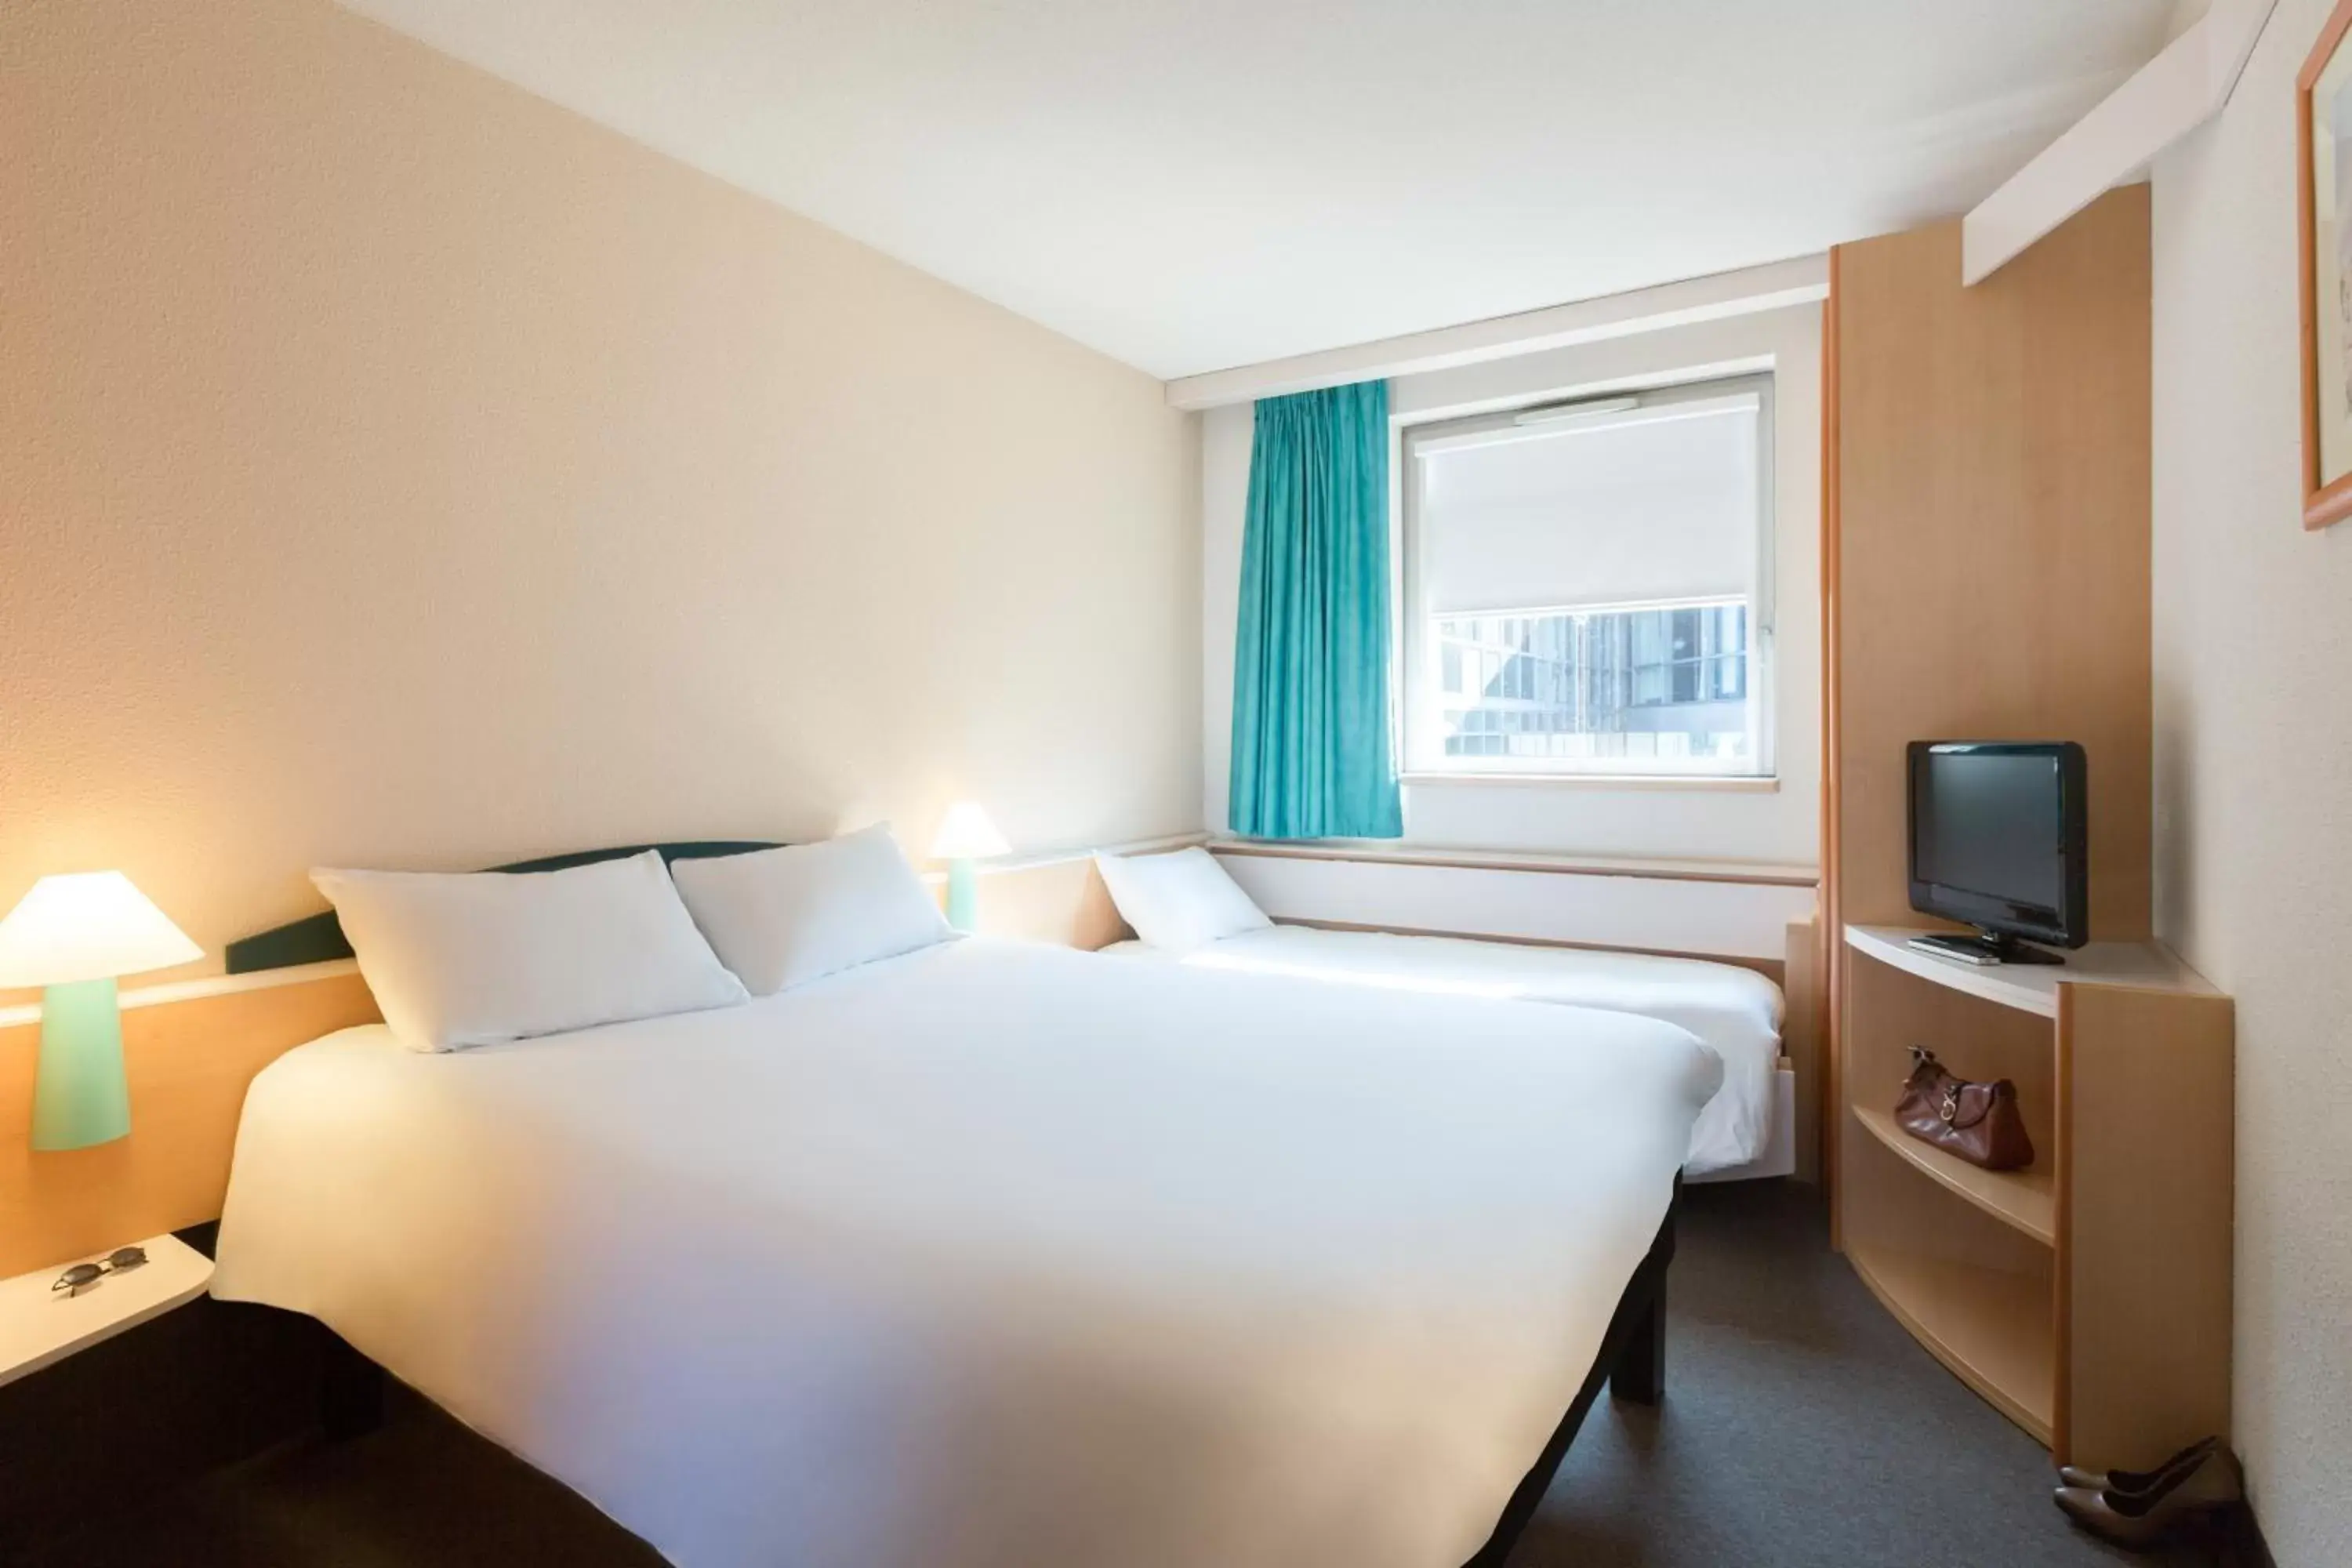 Standard Room with Double and Single Bed in ibis Lyon Est Bron